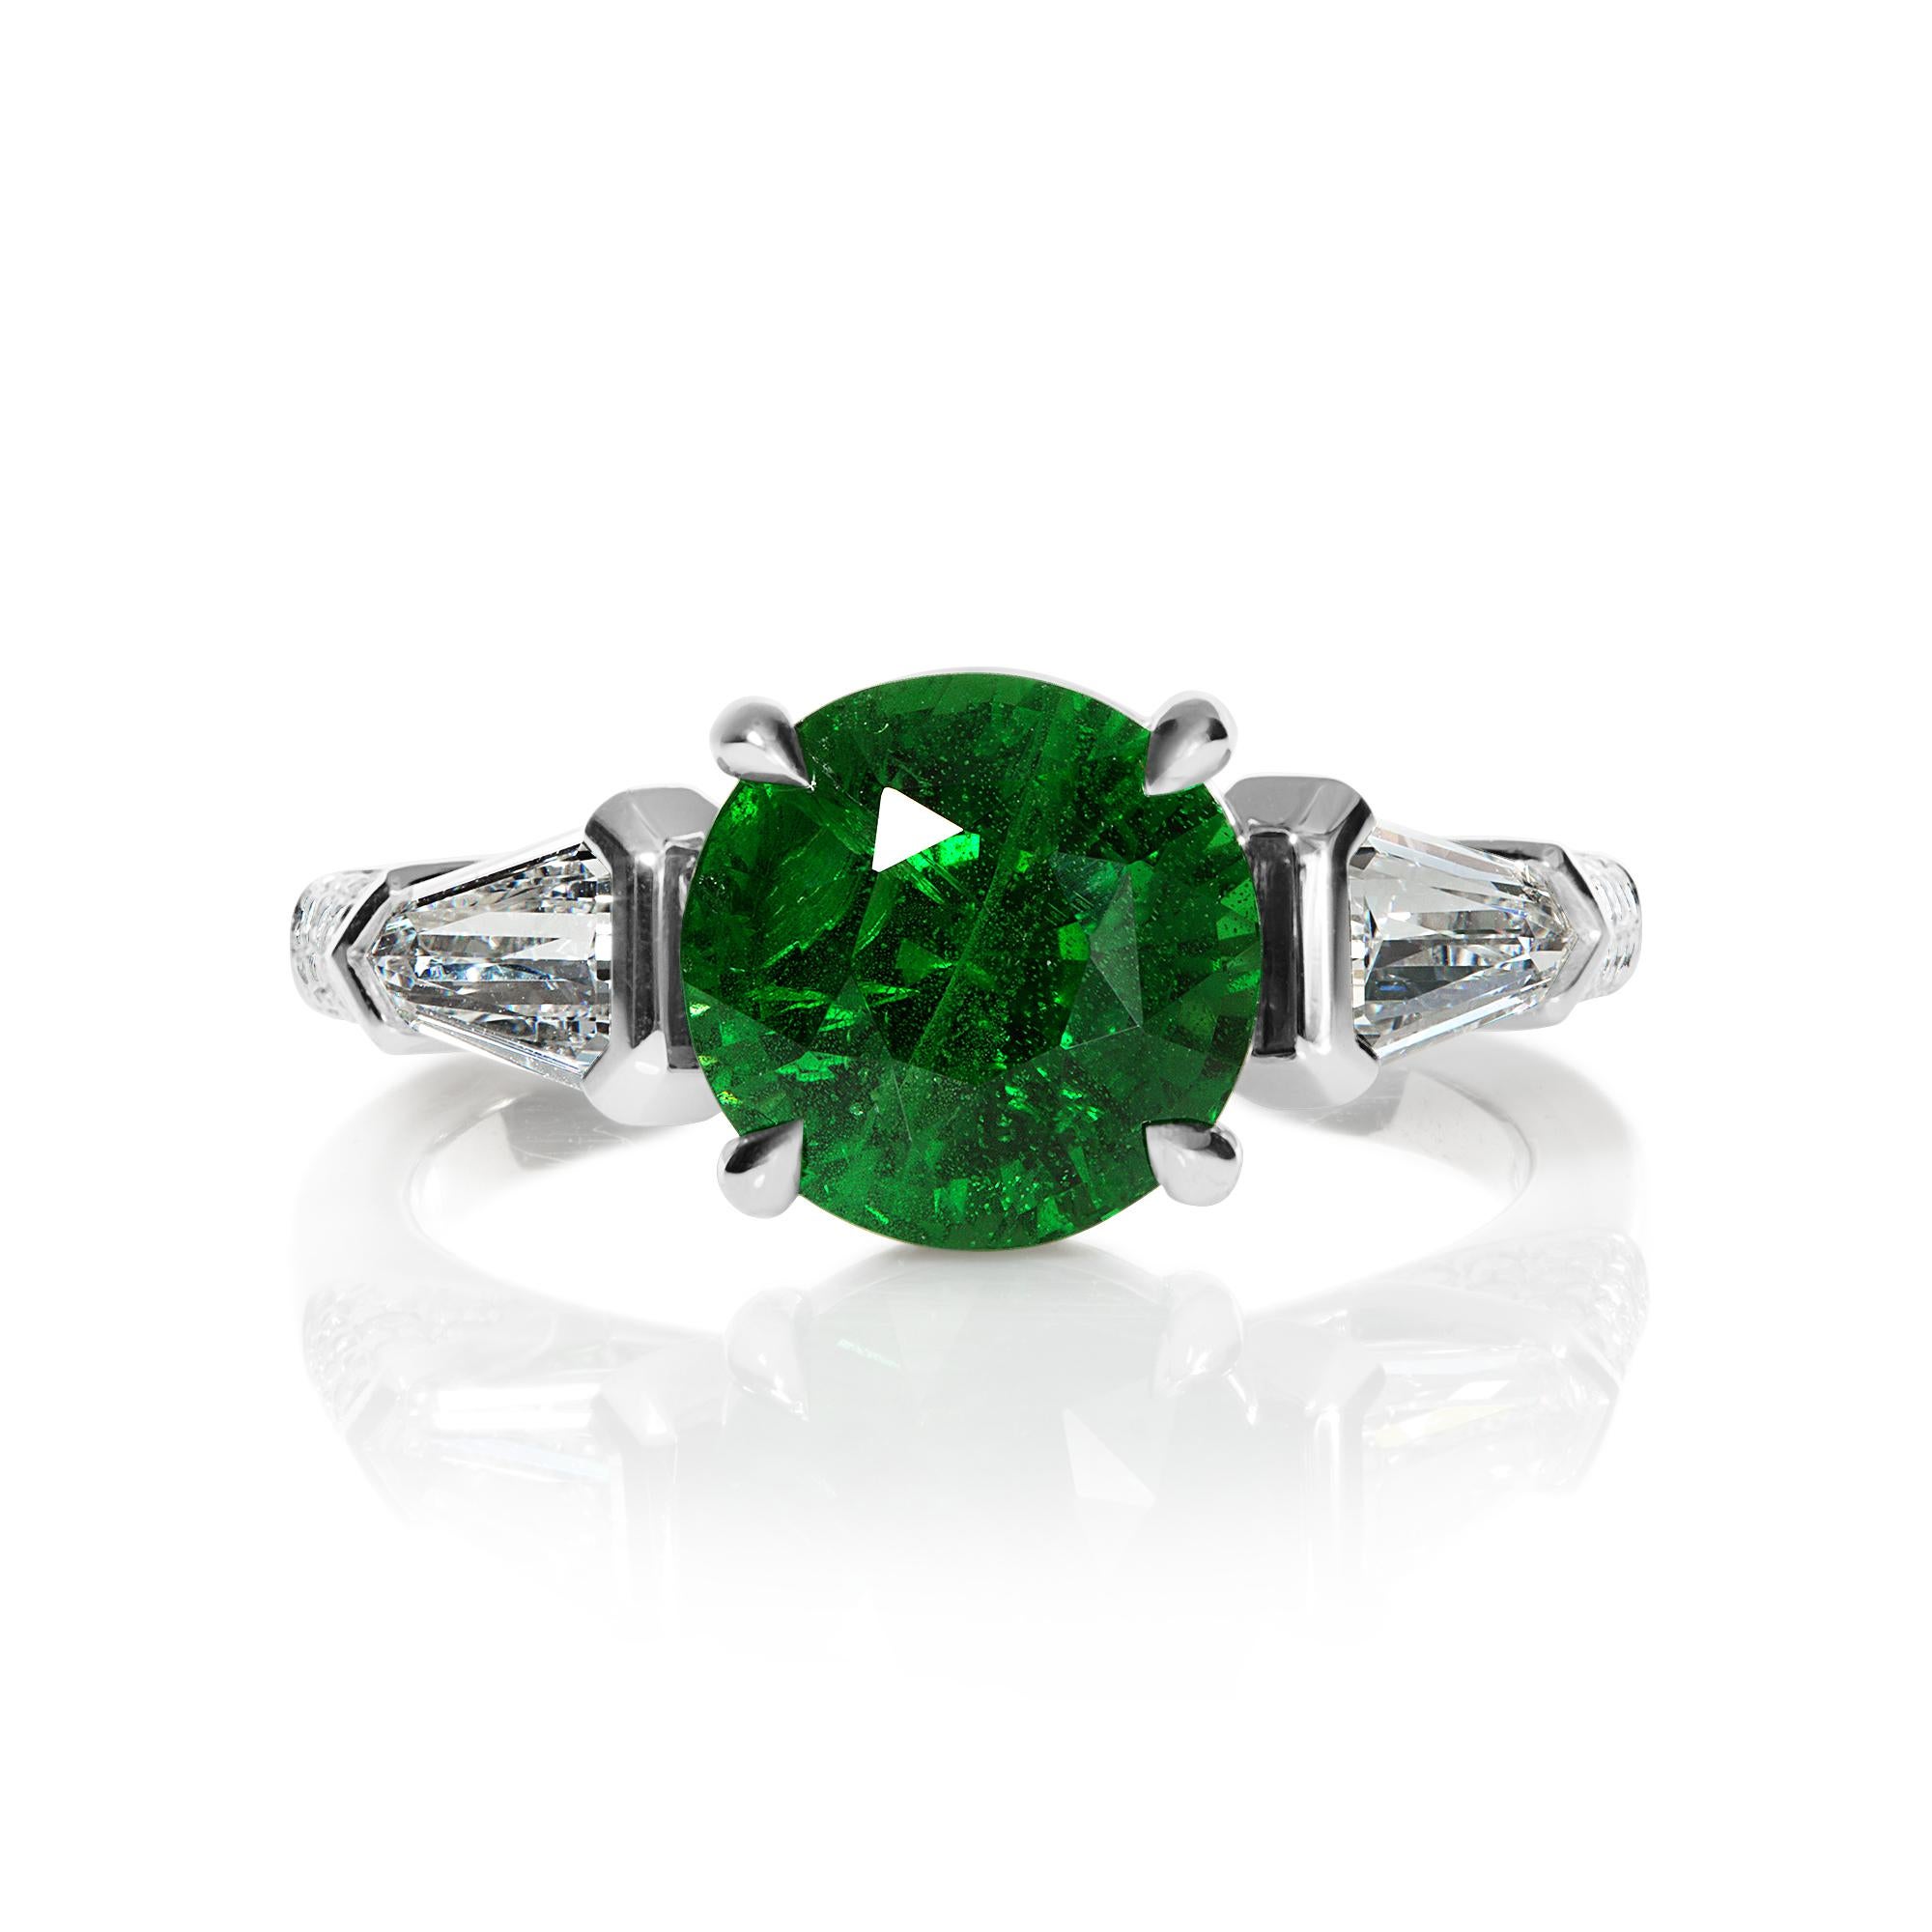 GIA 4.52CT GREEN TSAVORITE DIAMOND ENGAGEMENT WEDDING PLATINUM RING

An Iconic Style and VERY ELEGANT Natural Gorgeous Green Tsavorite & Diamond Trilogy Ring.
A SUPER fine Estate Ring features a gorgeous gem: GIA certified 3.48carat Natural Round